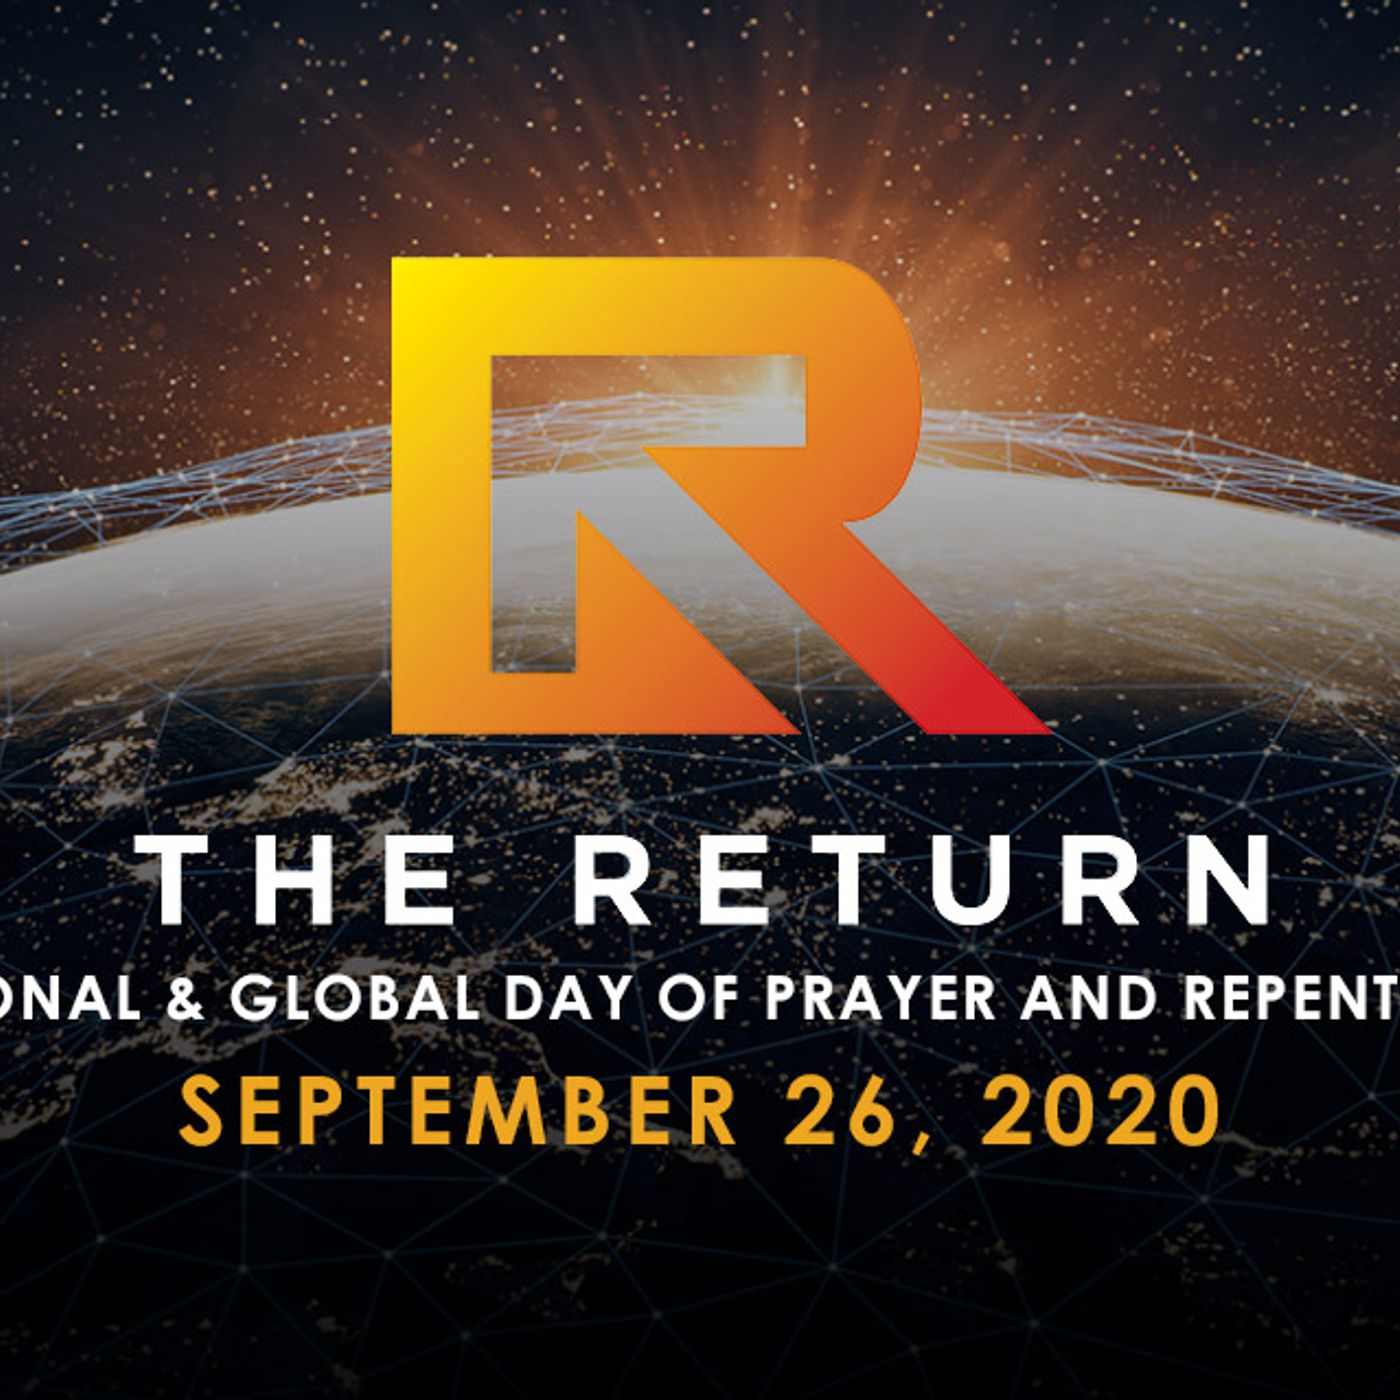 The Return, Jonathan Cahn, and a Prophetic Word